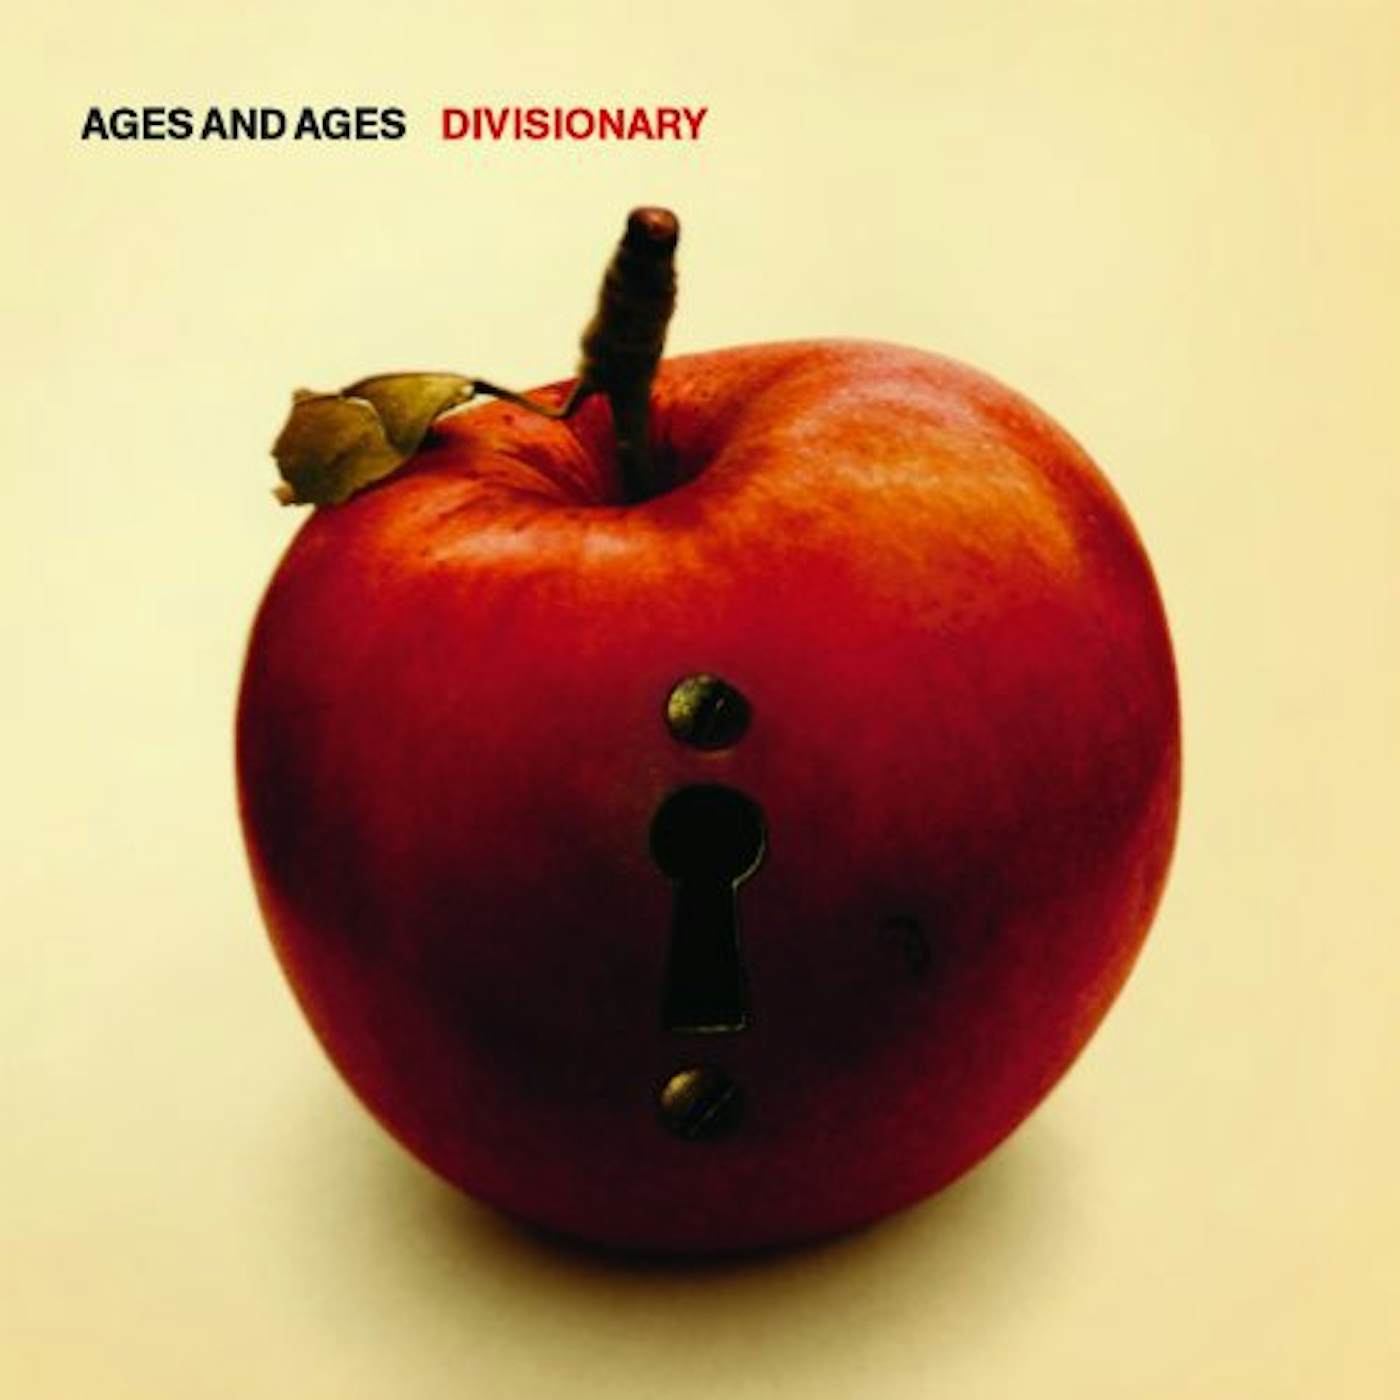 Ages and Ages Divisionary Vinyl Record